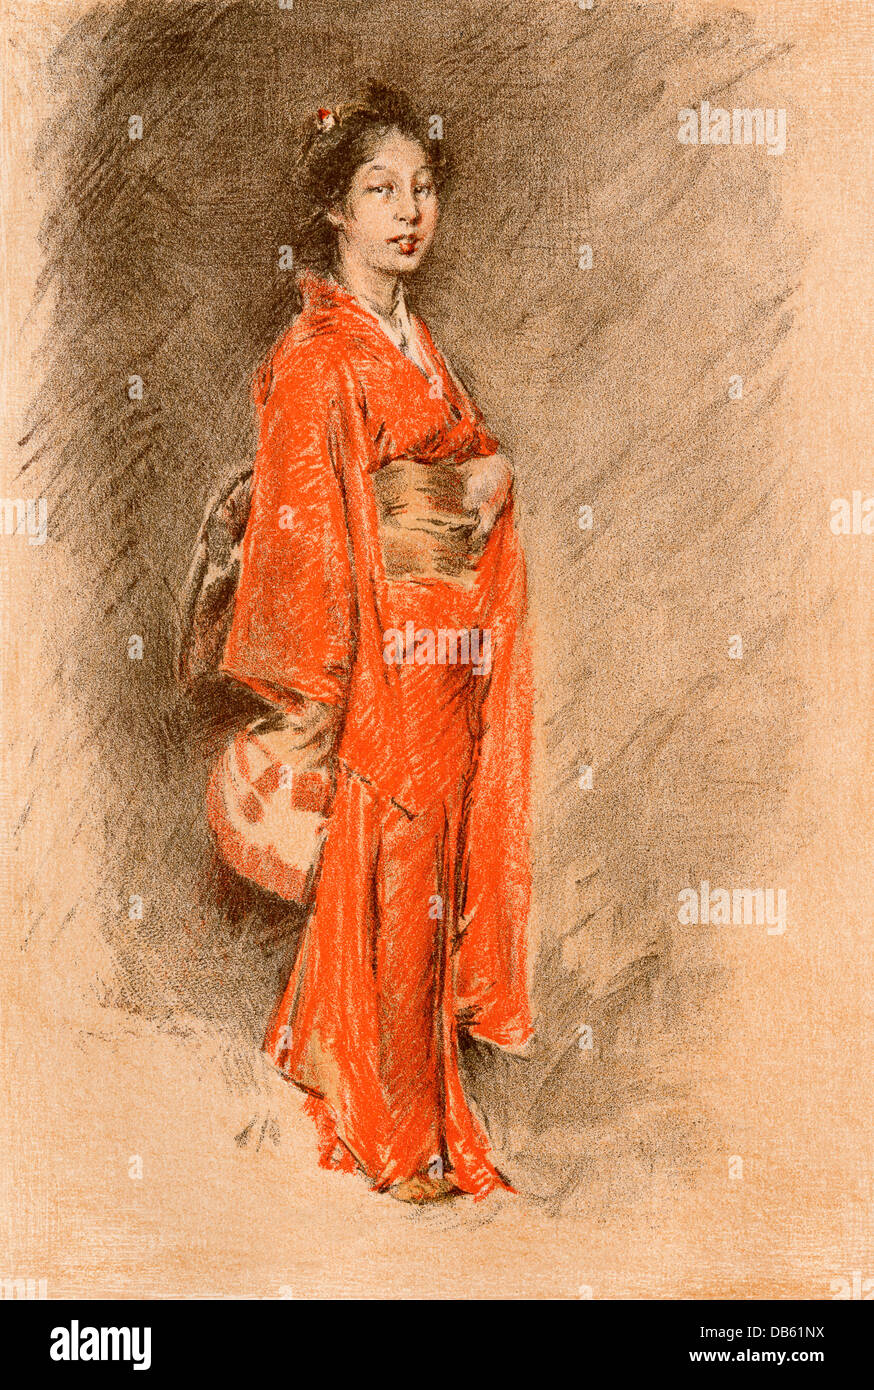 Young Japanese woman, 1890s. Color lithograph reproduction of a Robert Blum illustration Stock Photo